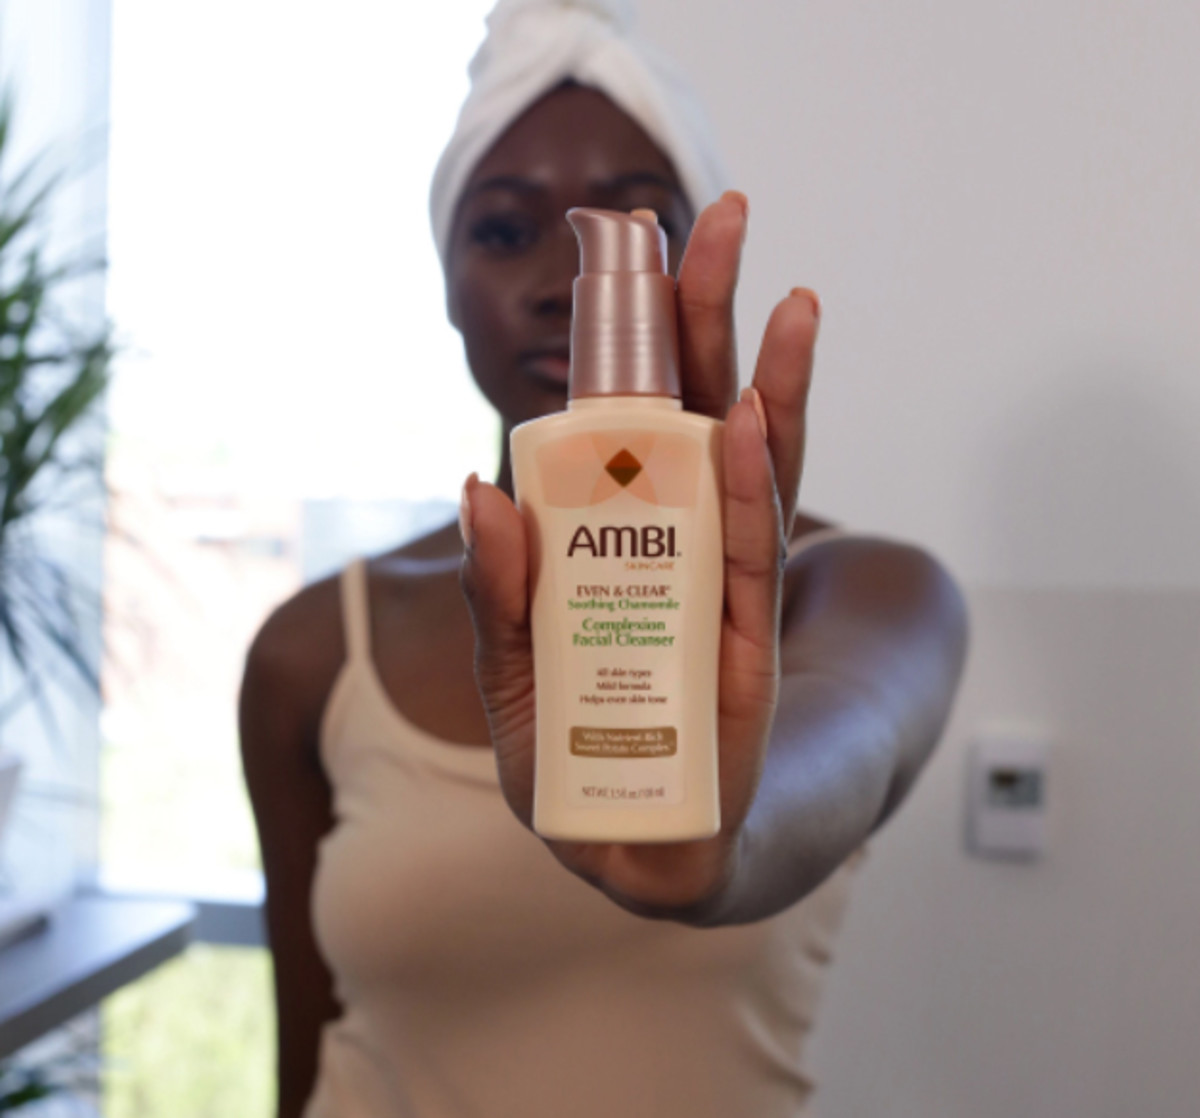 AMBI Soothing Chamomile Complexion Facial Cleanser